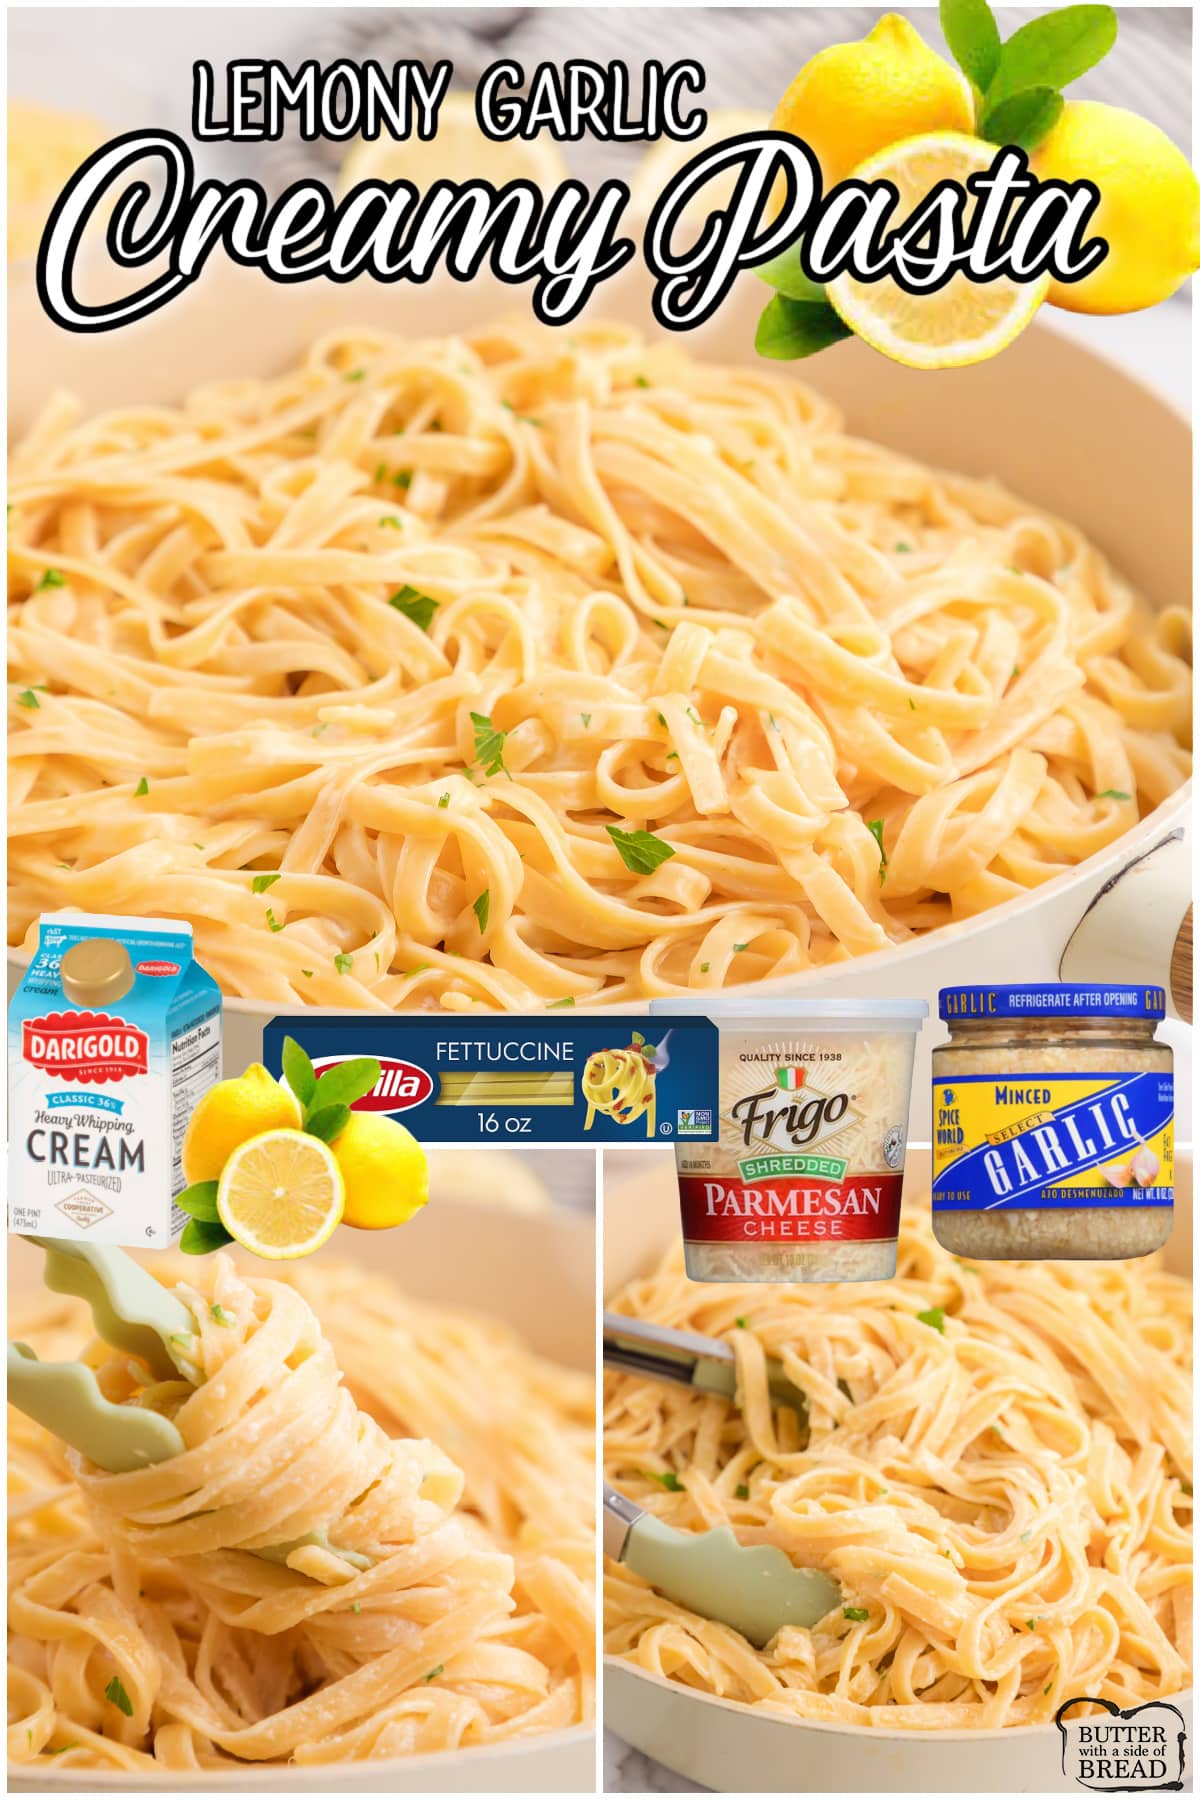 Lemony Garlic Pasta made with simple ingredients: cream, butter, garlic, lemon zest, Parmesan cheese & fettuccine pasta. Lovely creamy pasta recipe with incredible flavors!